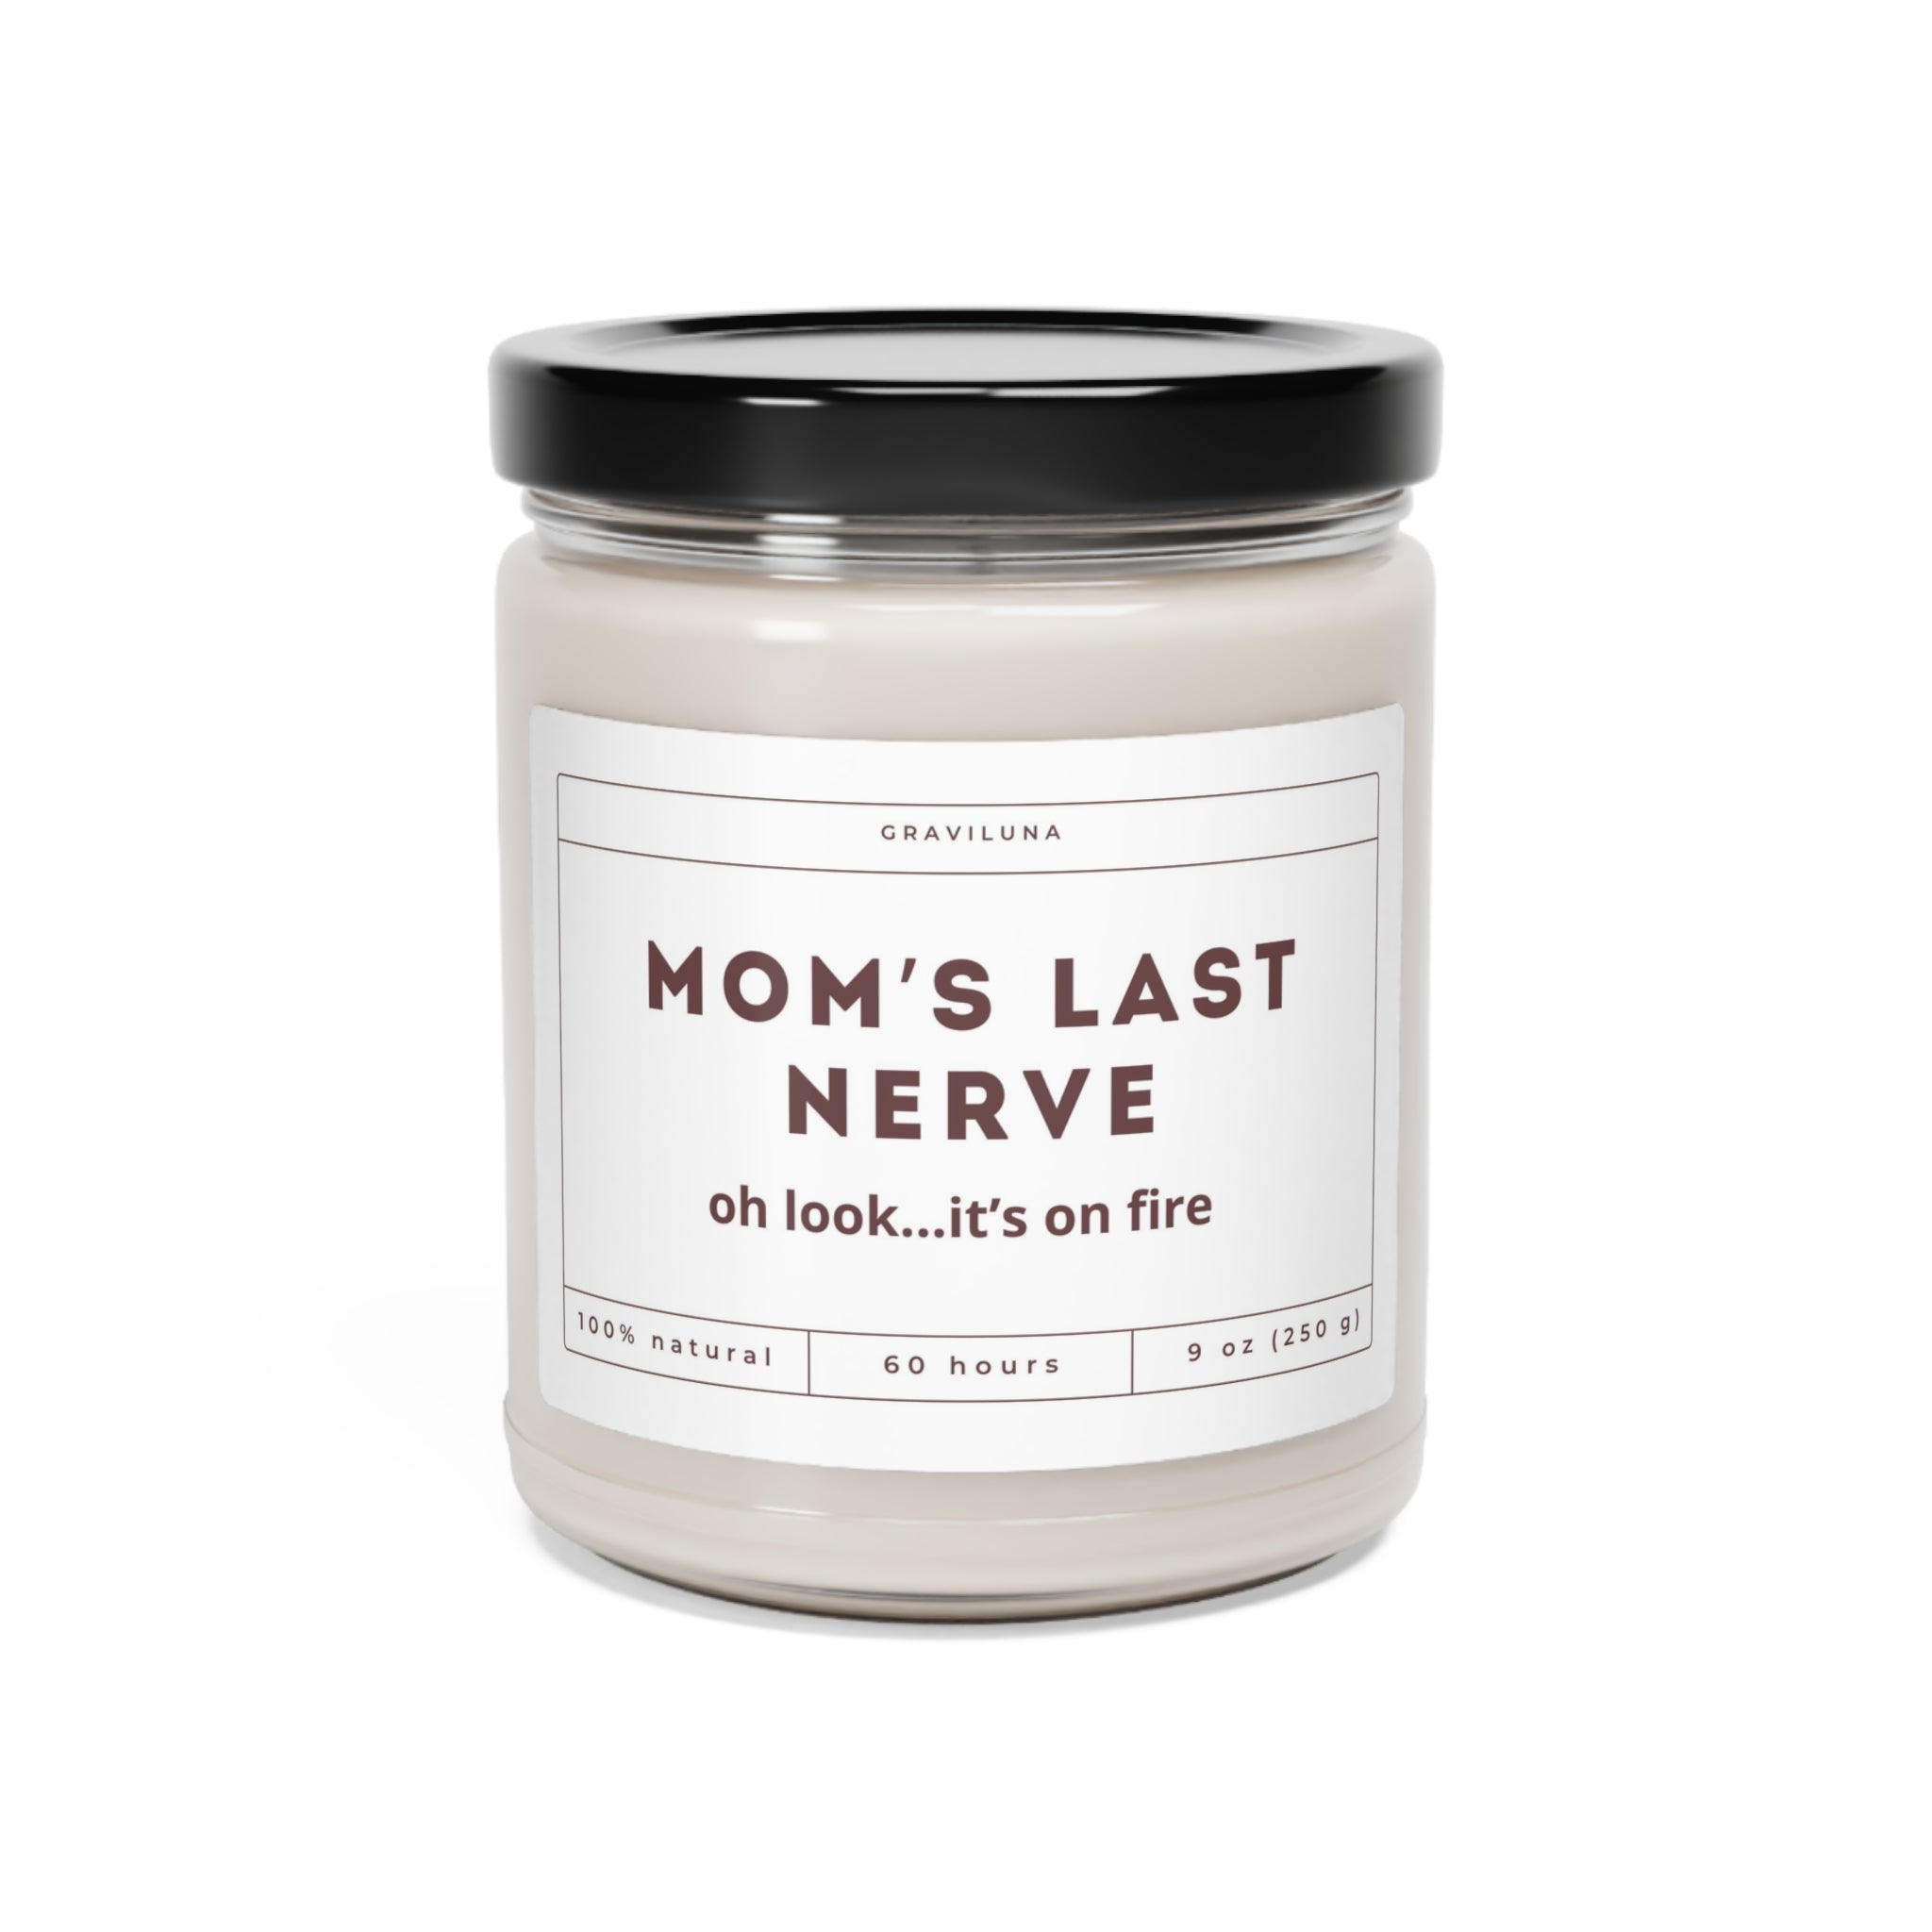 "Mom's Last Nerve" Candle